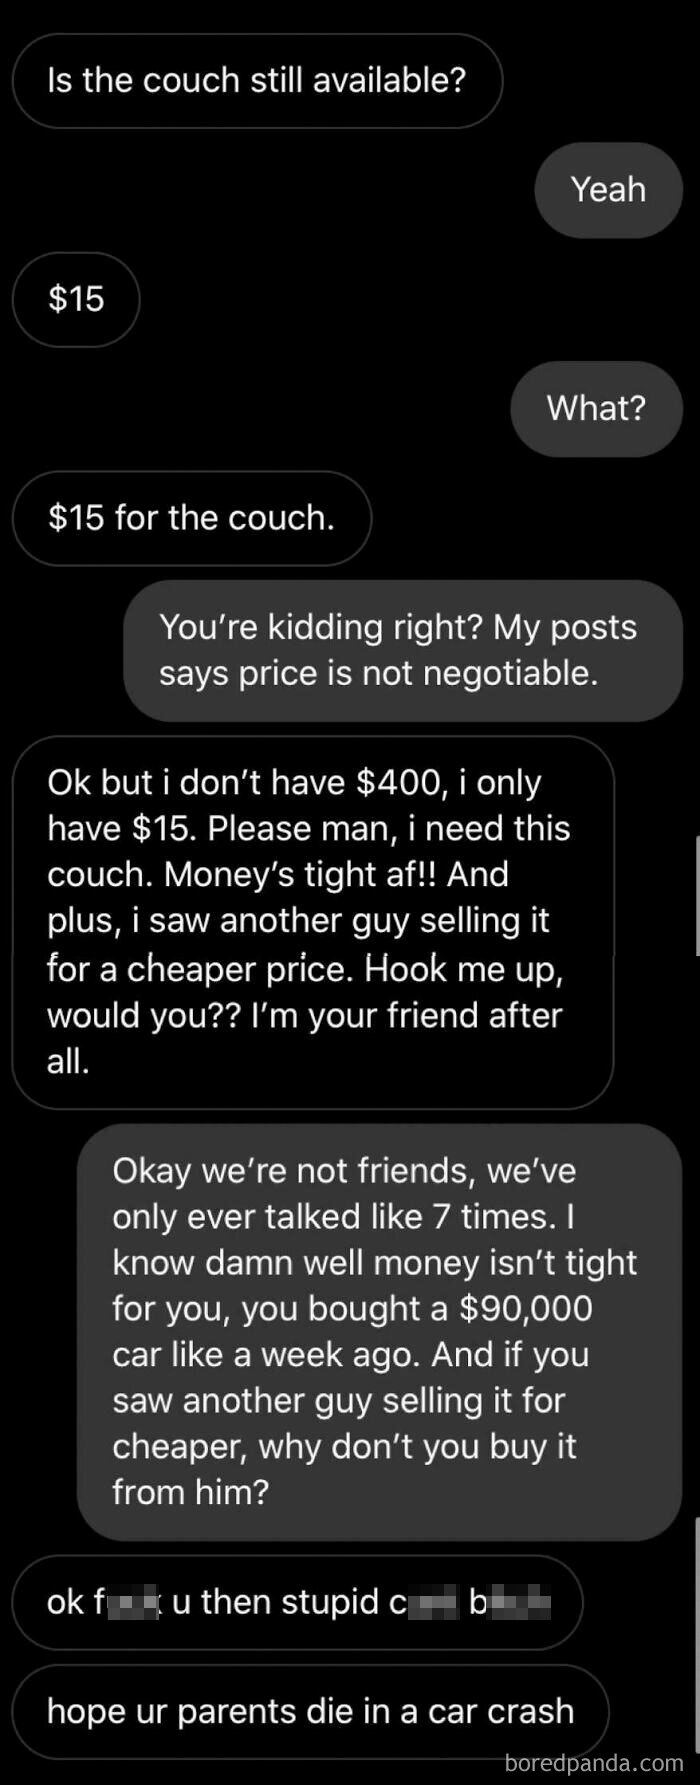 Not Me, But An Experience My Friend Had While Trying To Sell A Couch